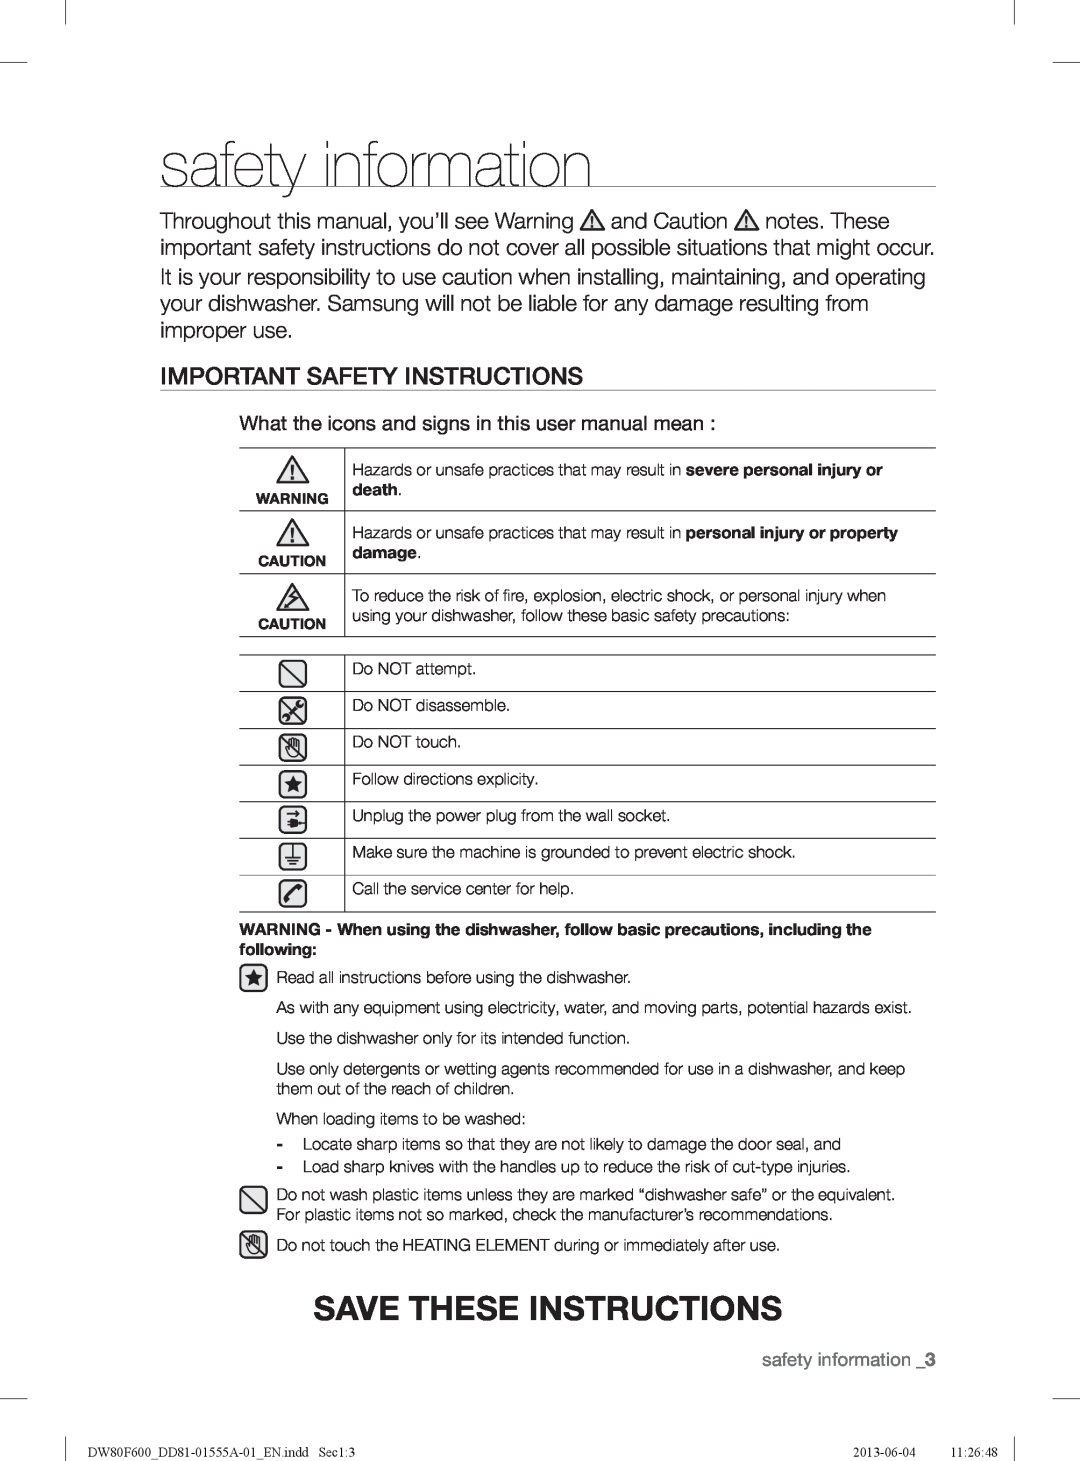 Samsung DW80F600UTB, DW80F600UTW safety information, Save These Instructions, Important Safety Instructions, death, damage 